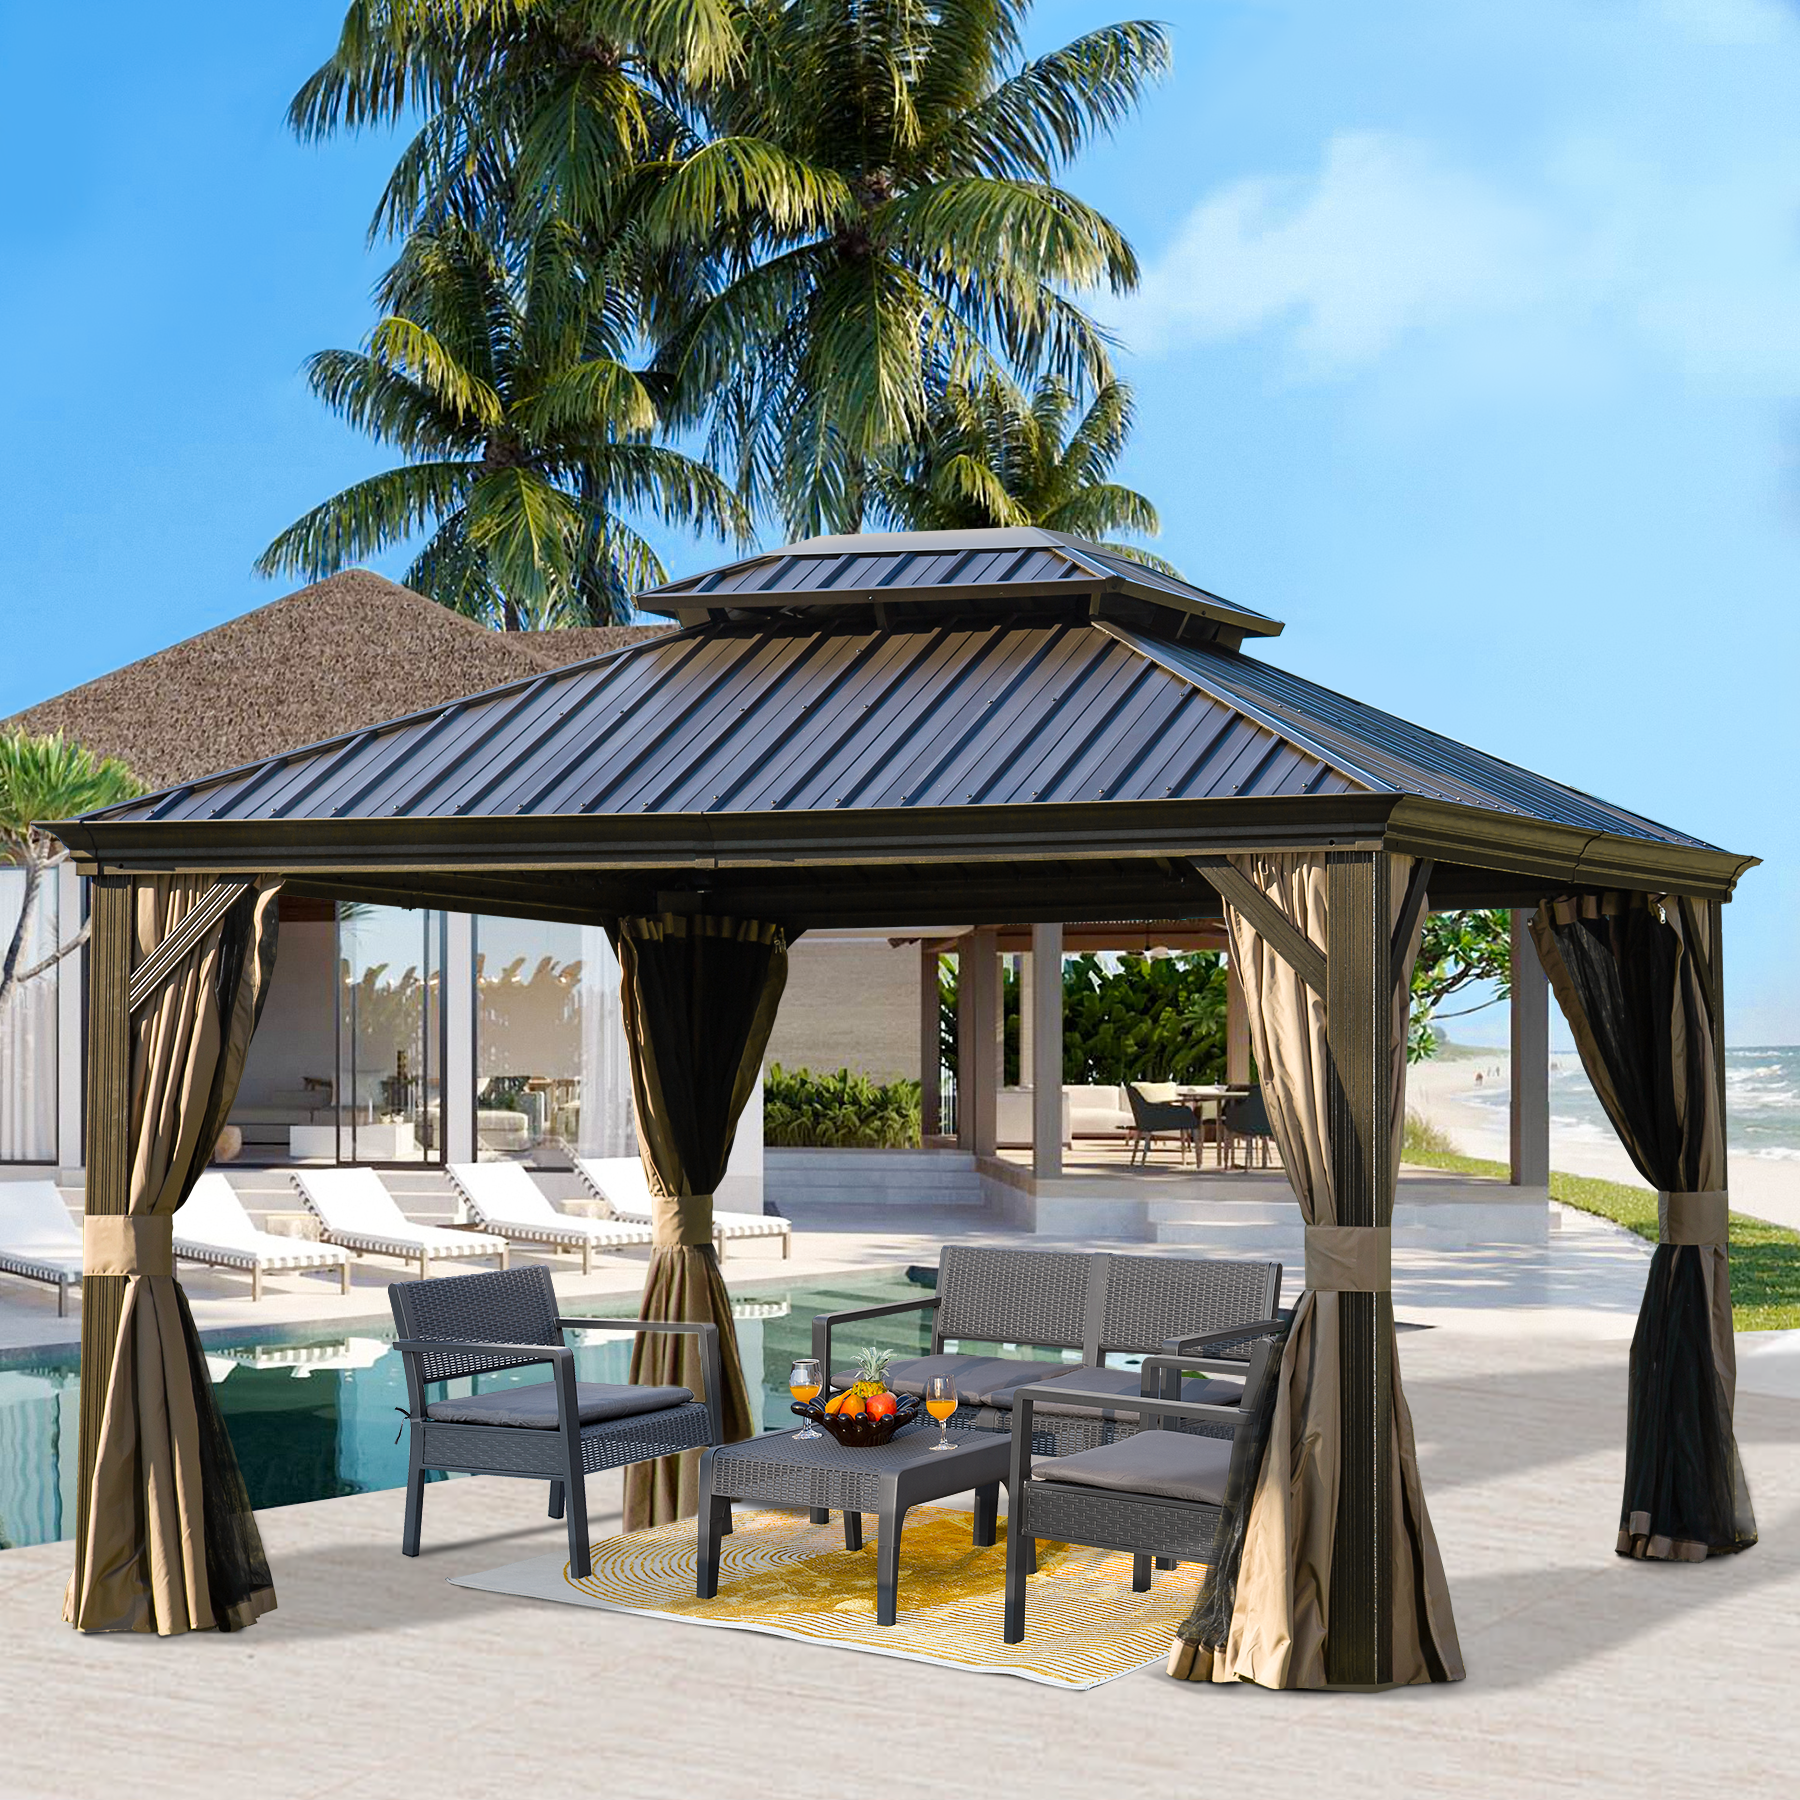 Domi Hardtop Gazebo Outdoor Aluminum Roof Canopy With Mosquito Netting and Curtains